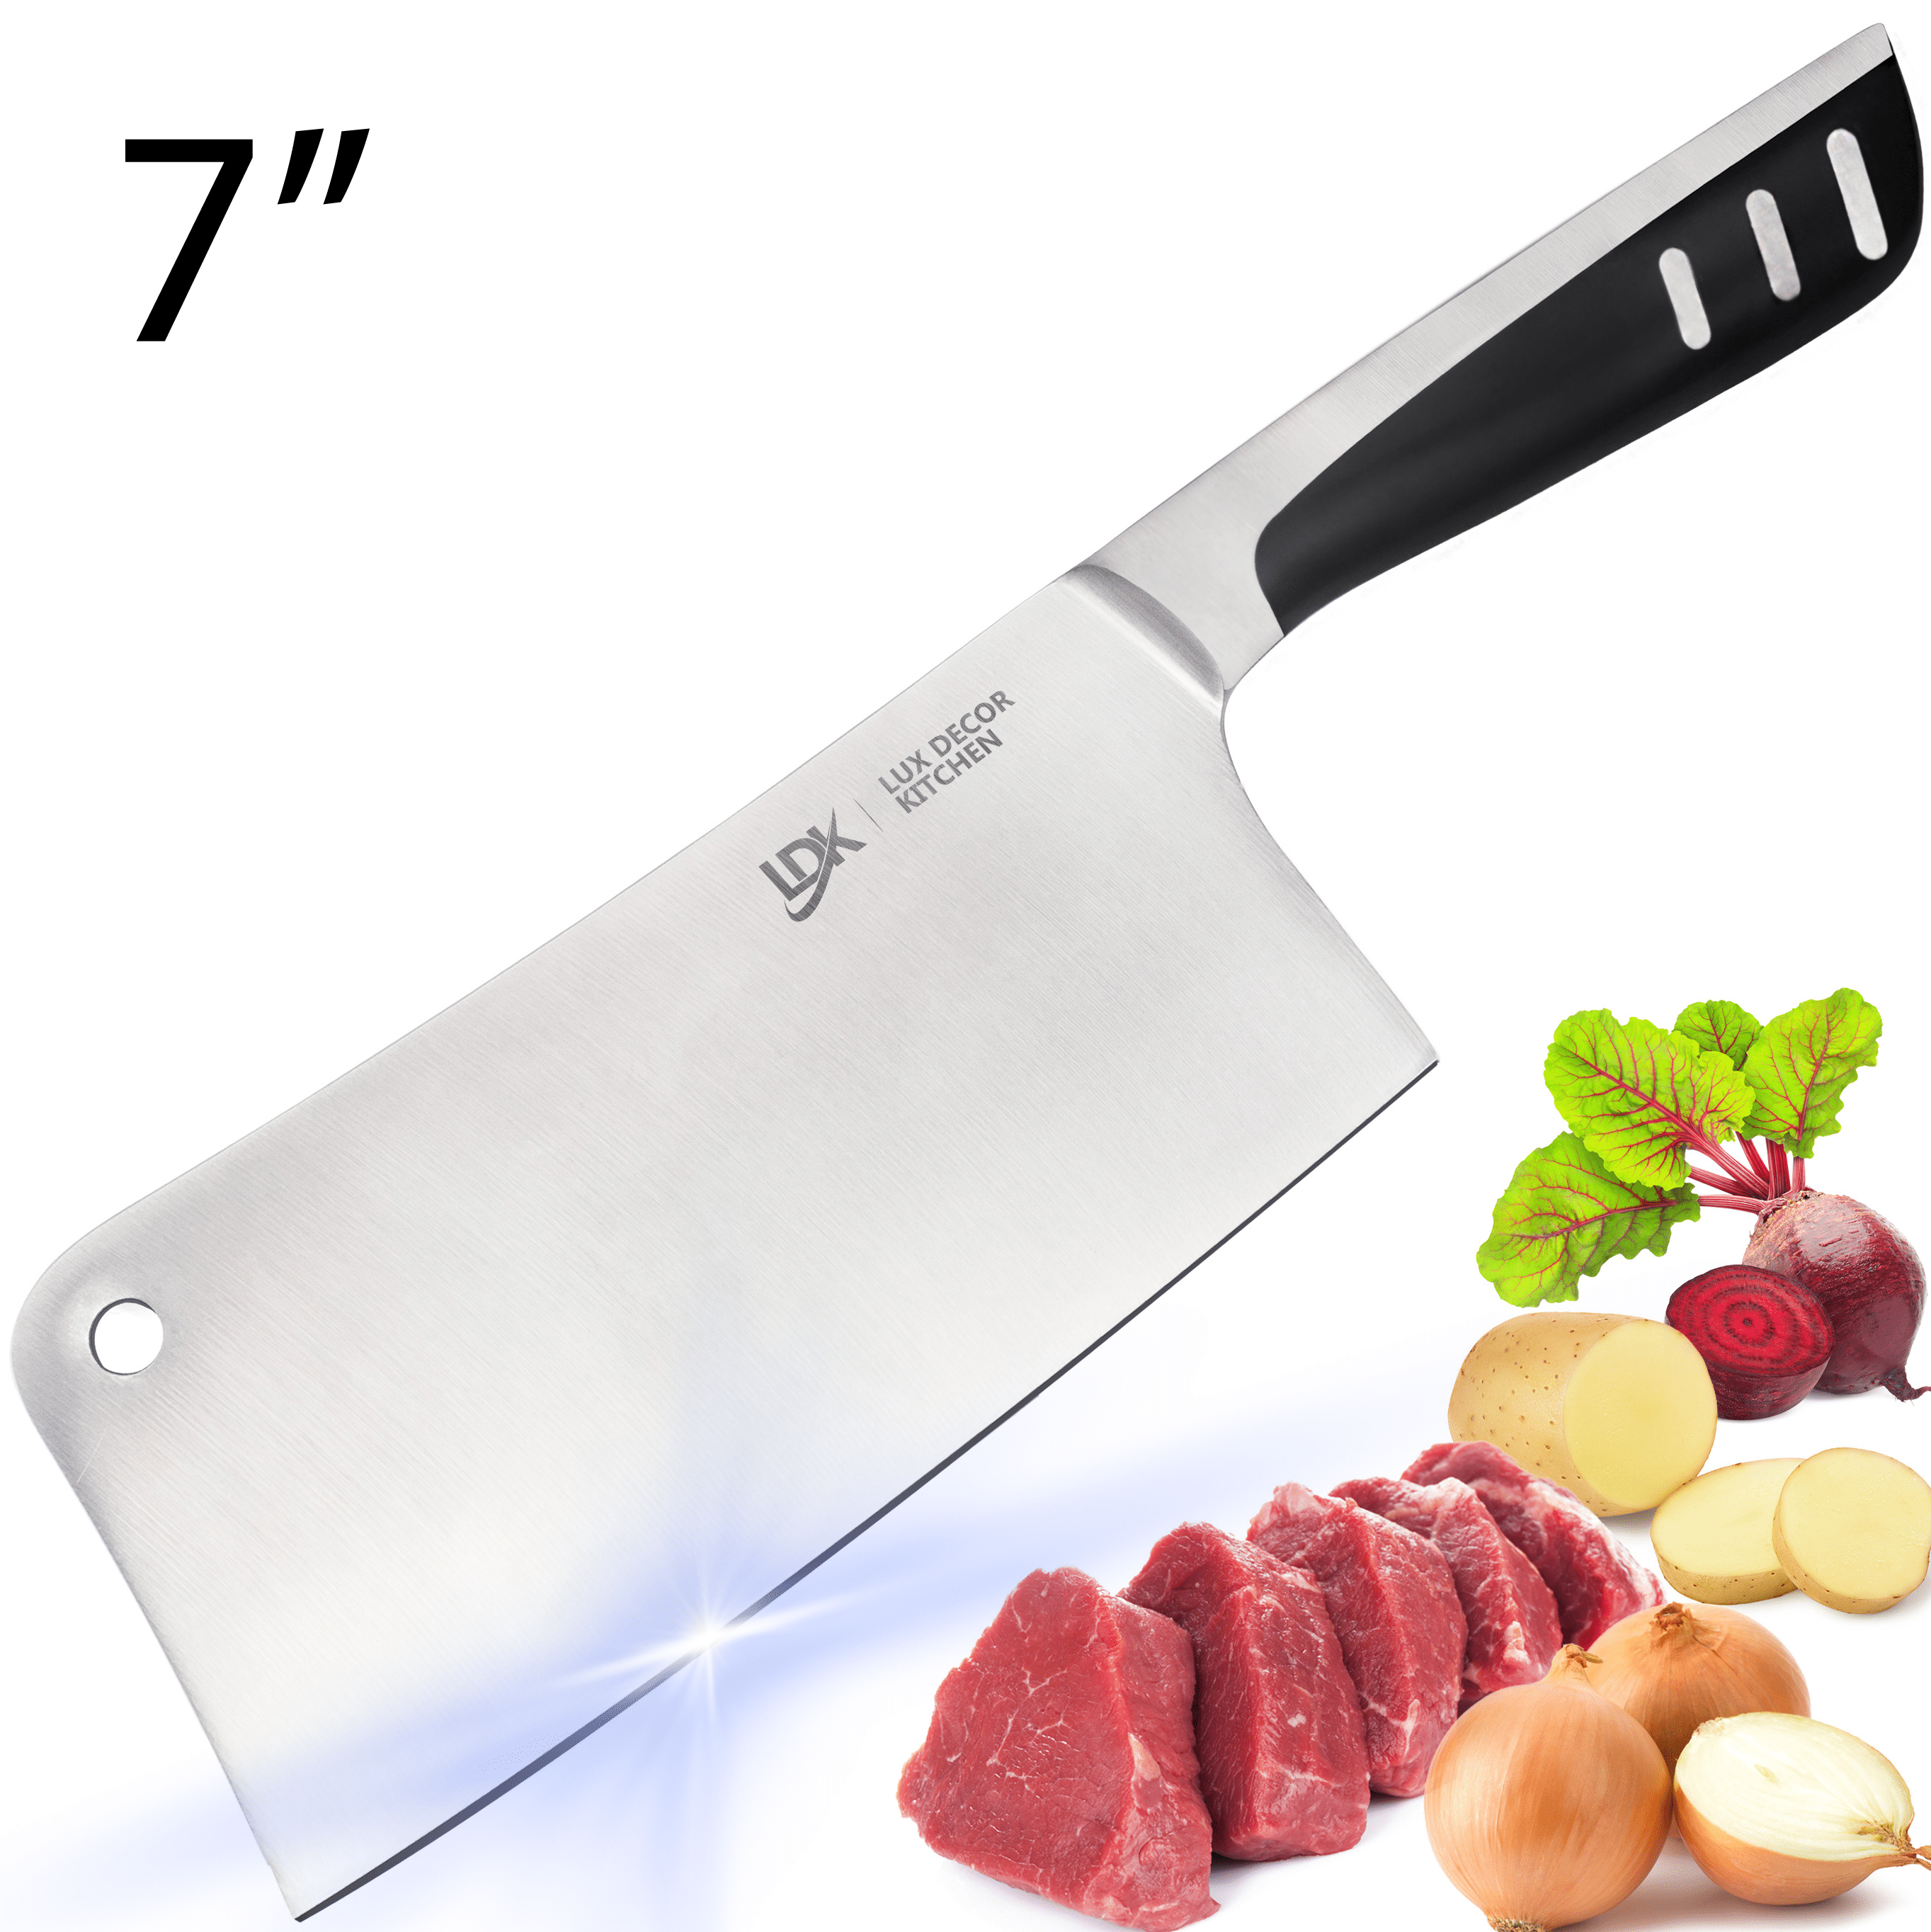 Lux Decor Kitchen Butcher Knife Stainless Steel - 7 Inch Multi Purpose Best  for Home Kitchen and Restaurants Chef Knife Heavy Duty Chopper Meat